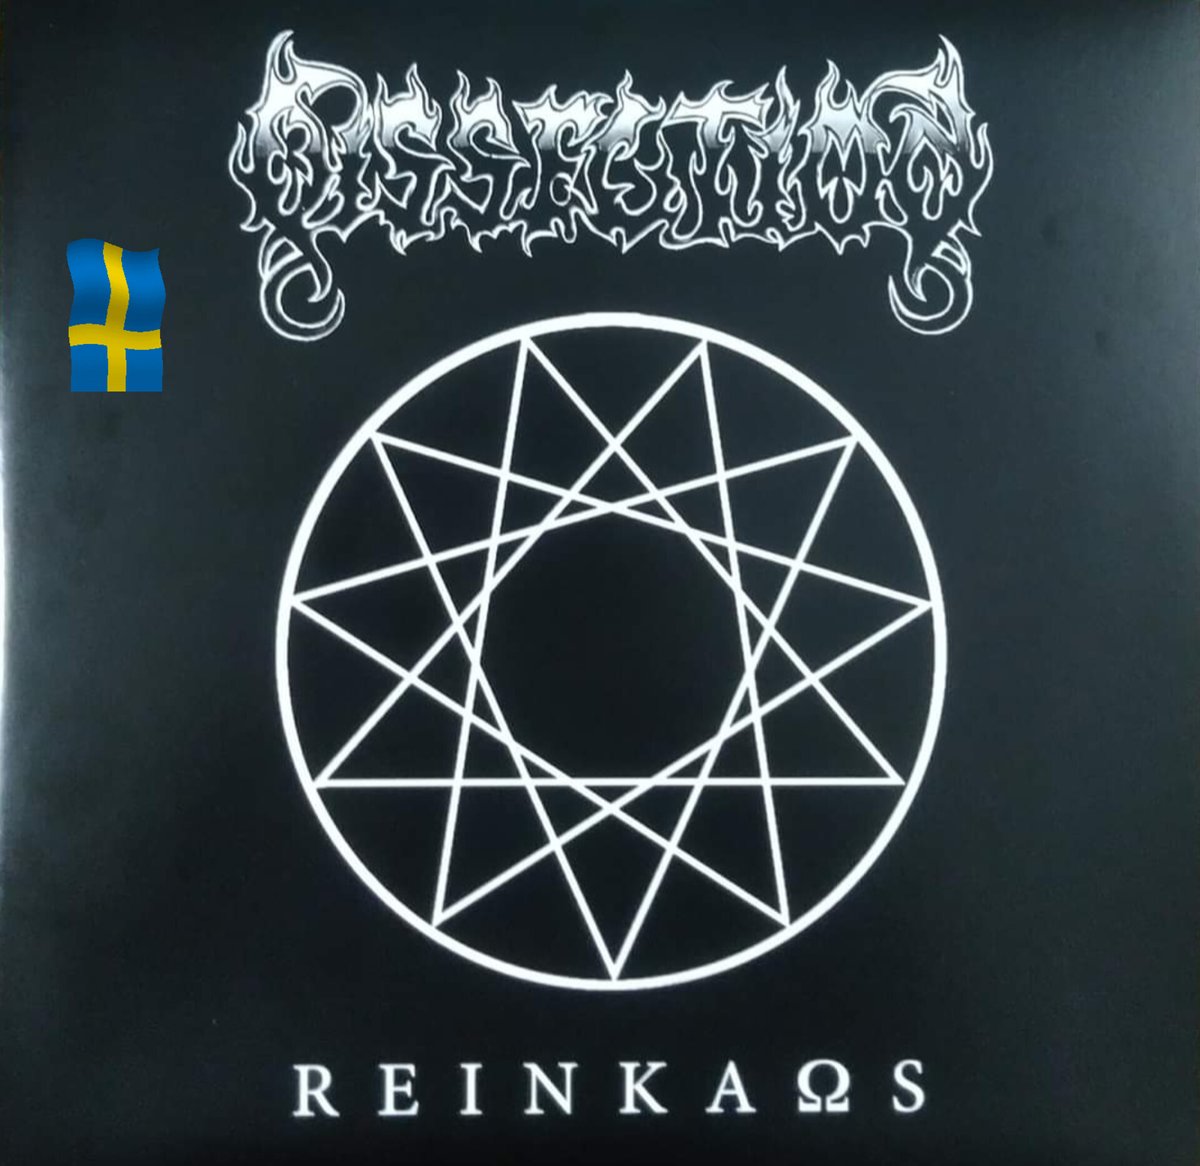 #Dissection 🇸🇪#Sweden 
          DISSECTION 
              Reinkaos 
            Full-length 
Release date:April 30th, 2006
#Melodic #BlackMetal